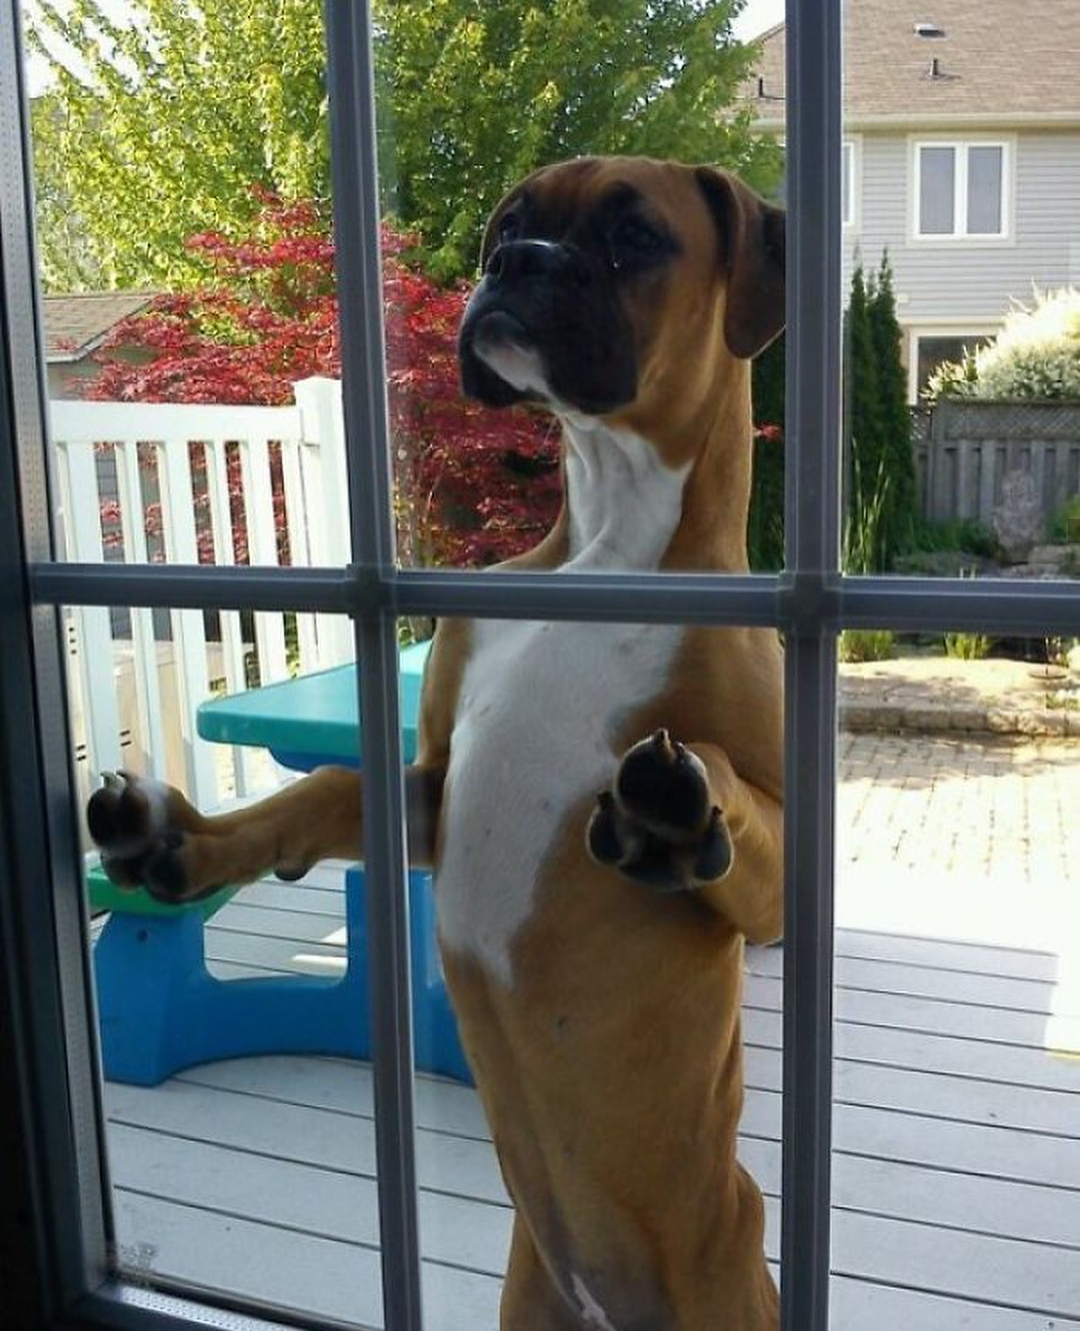 A Boxer dog leaning towards the glass window while peeking inside